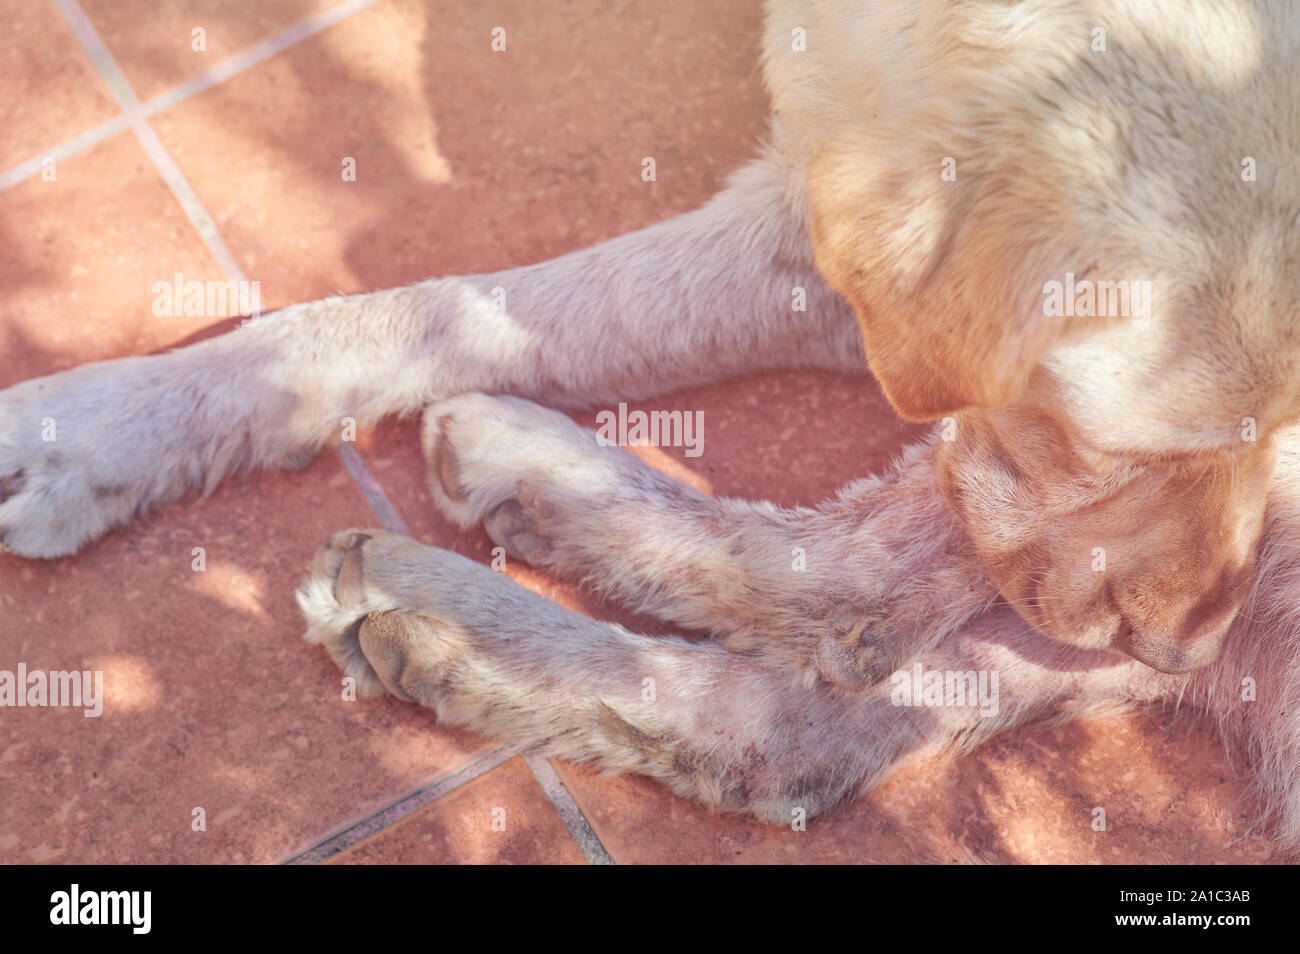 Dog with fungus disease bite her skin close up view Stock Photo